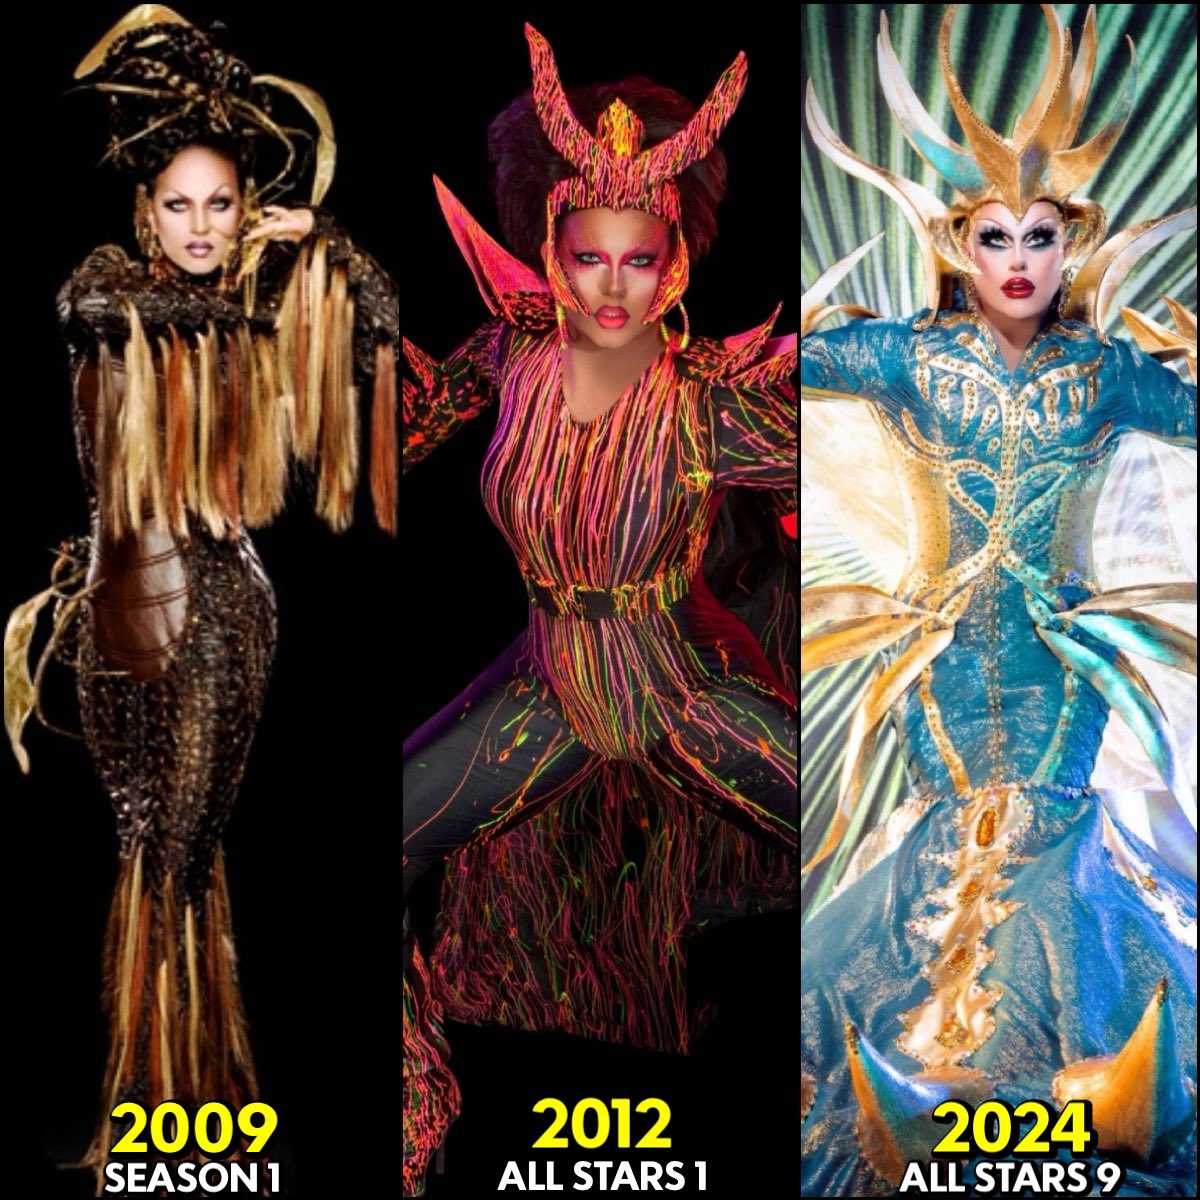 The promo of Shannel over the years✨